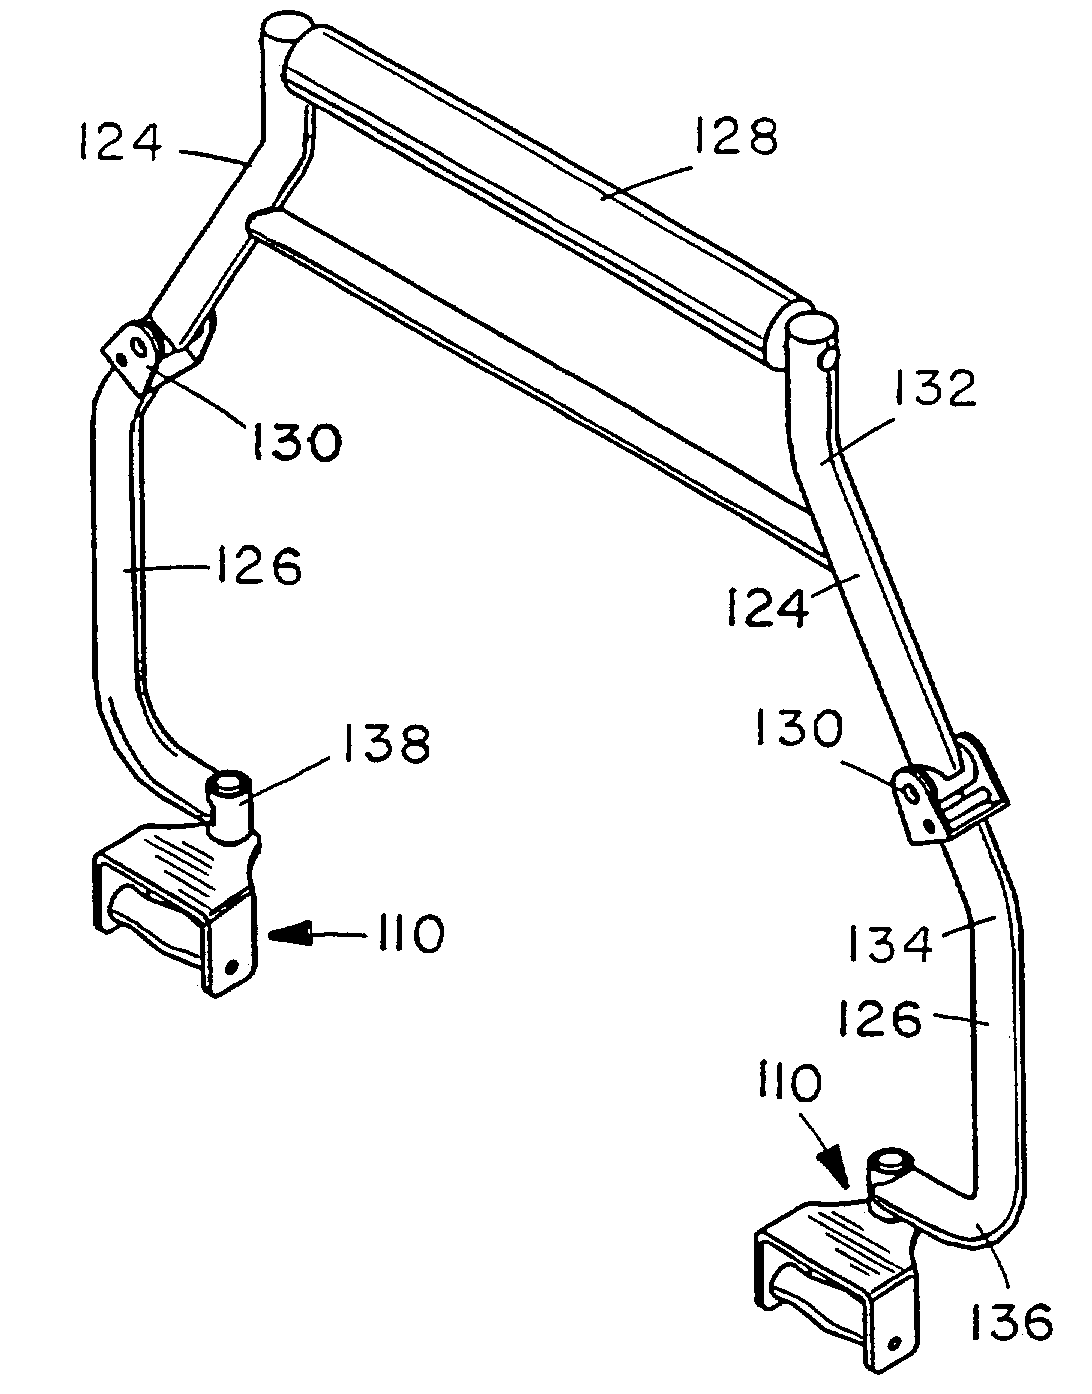 Exercise arm assembly for exercise machine